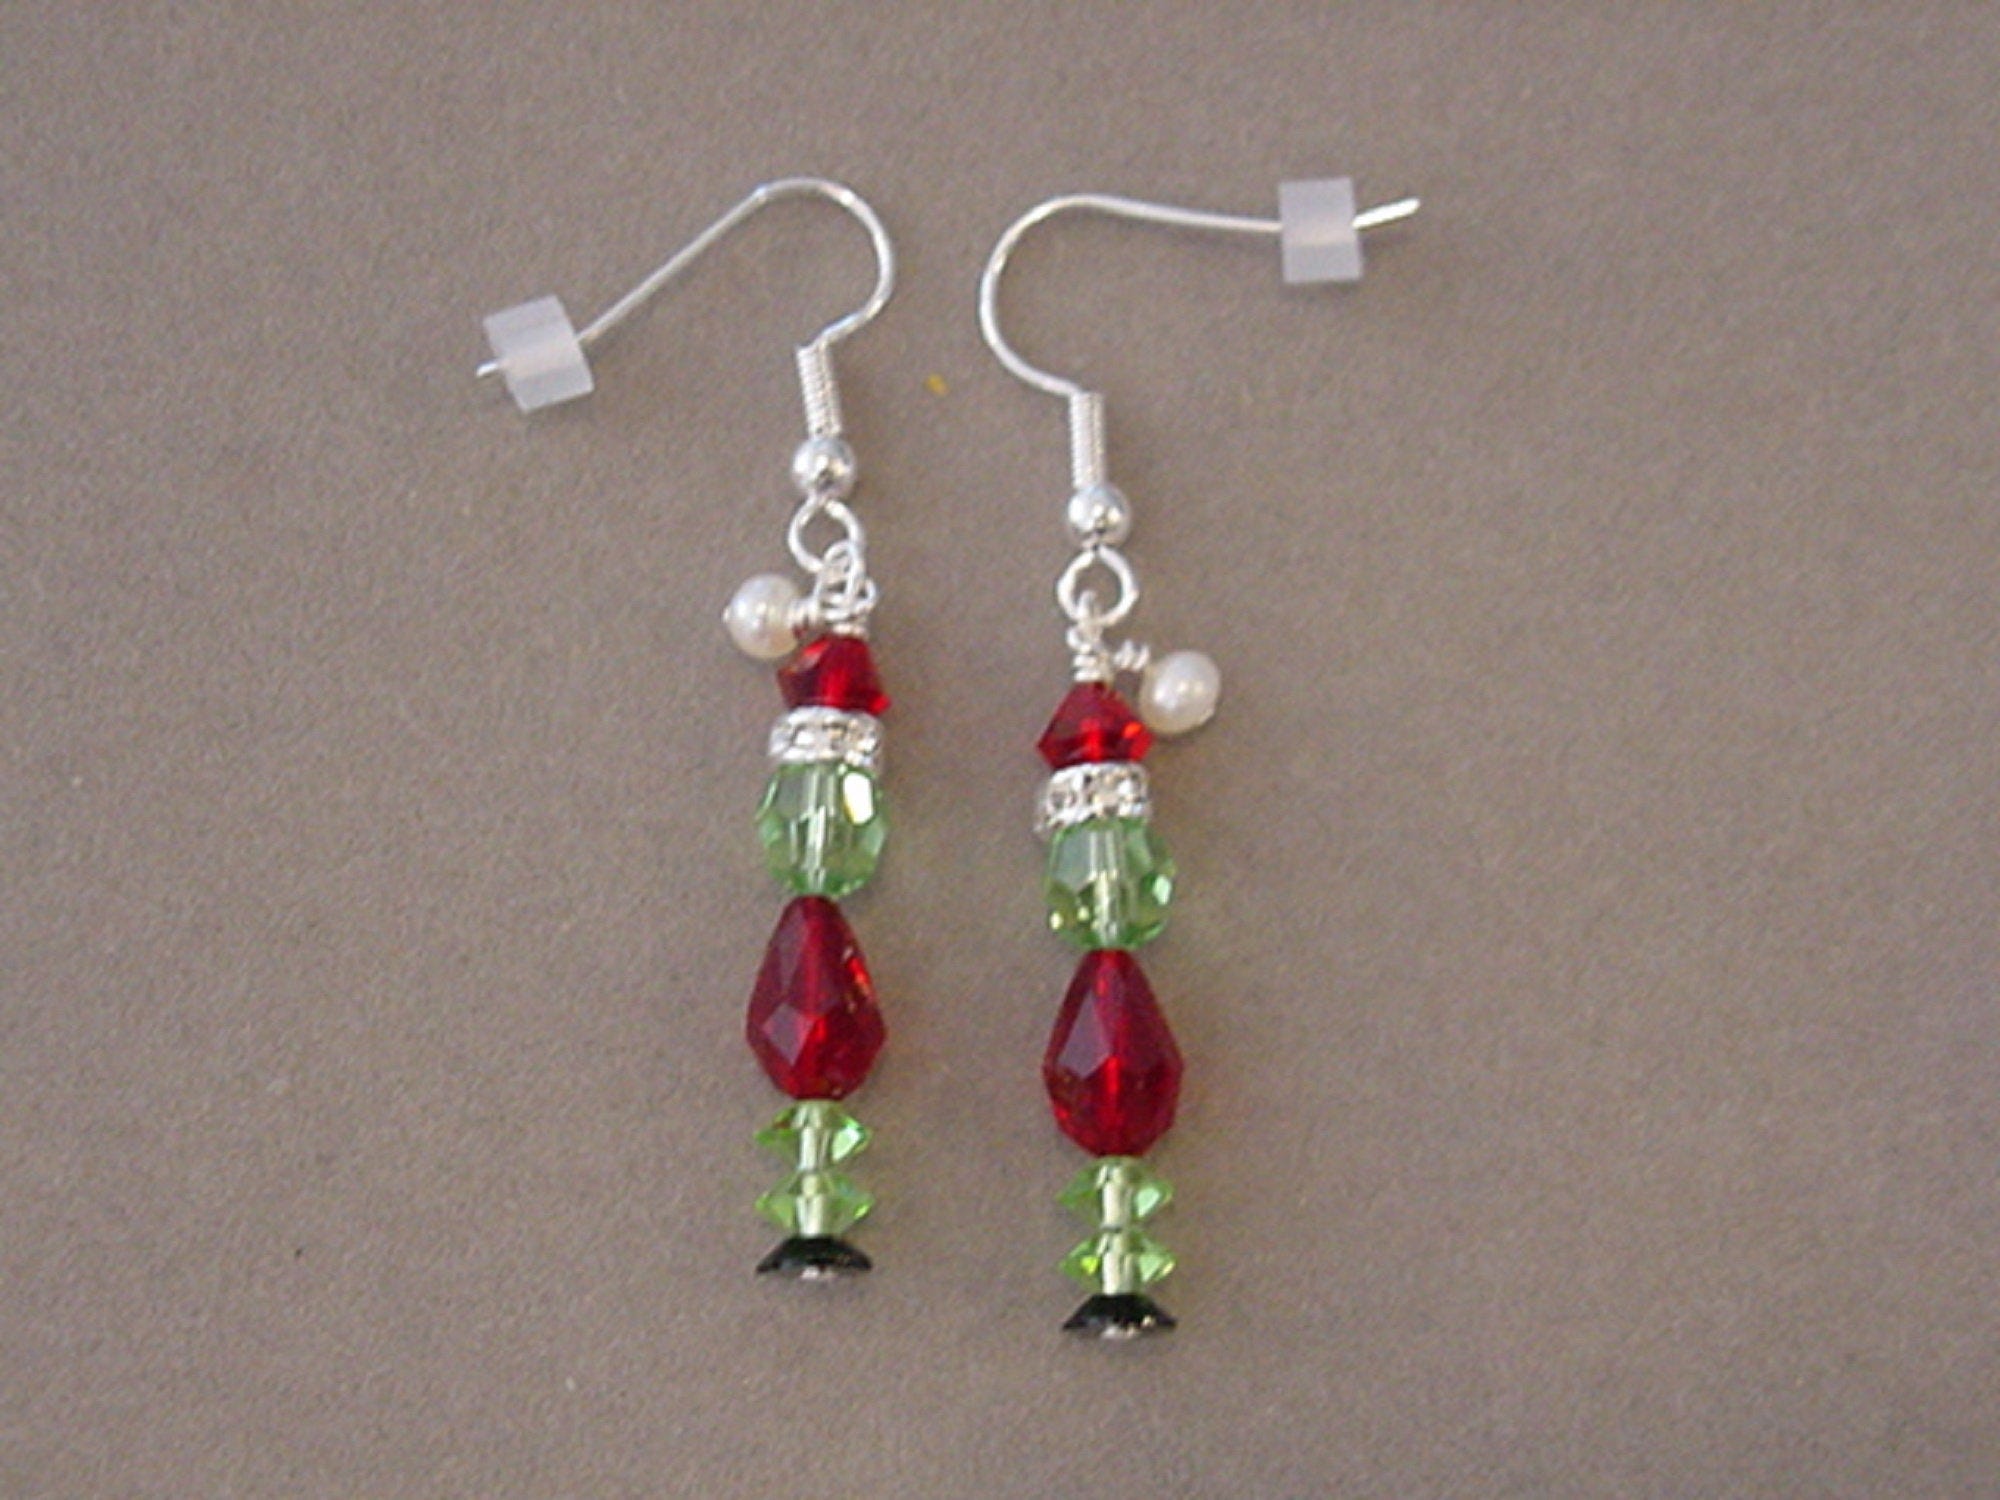 Crystal GRINCH EARRINGS Christmas Jewelry Made with Swarovski crystals Grinch Earrings silver Plated